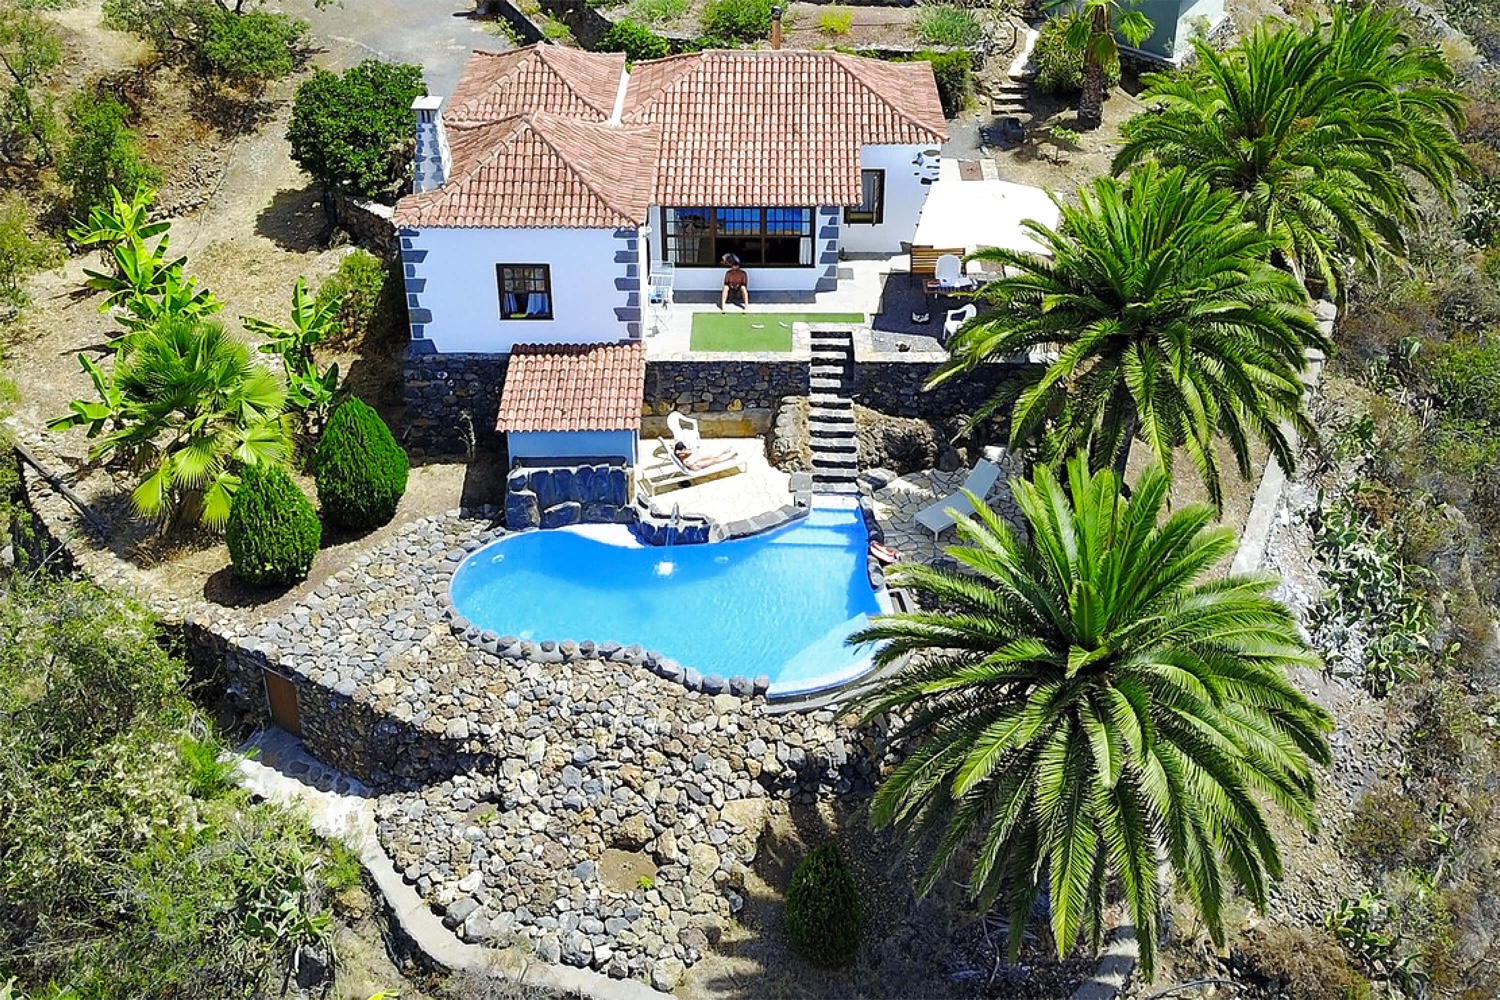 Rustic two-bedroom house with a magnificent outside area with nice details, private pool and fantastic views to the green landscape of La Palma